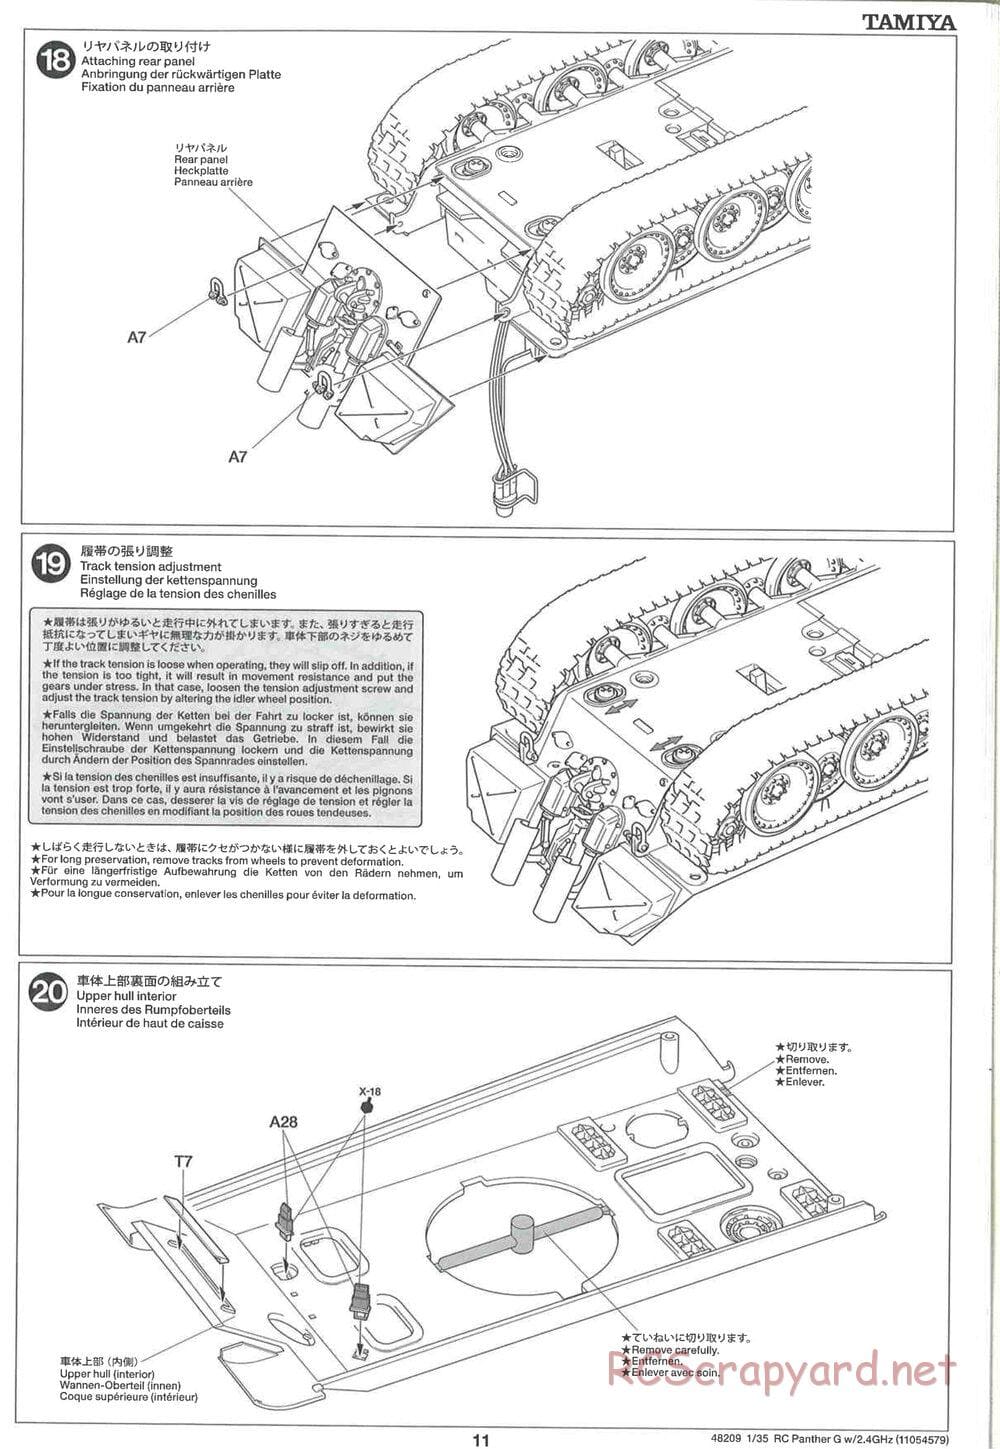 Tamiya - German Panther Type G - Late Version - 1/35 Scale Chassis - Manual - Page 11